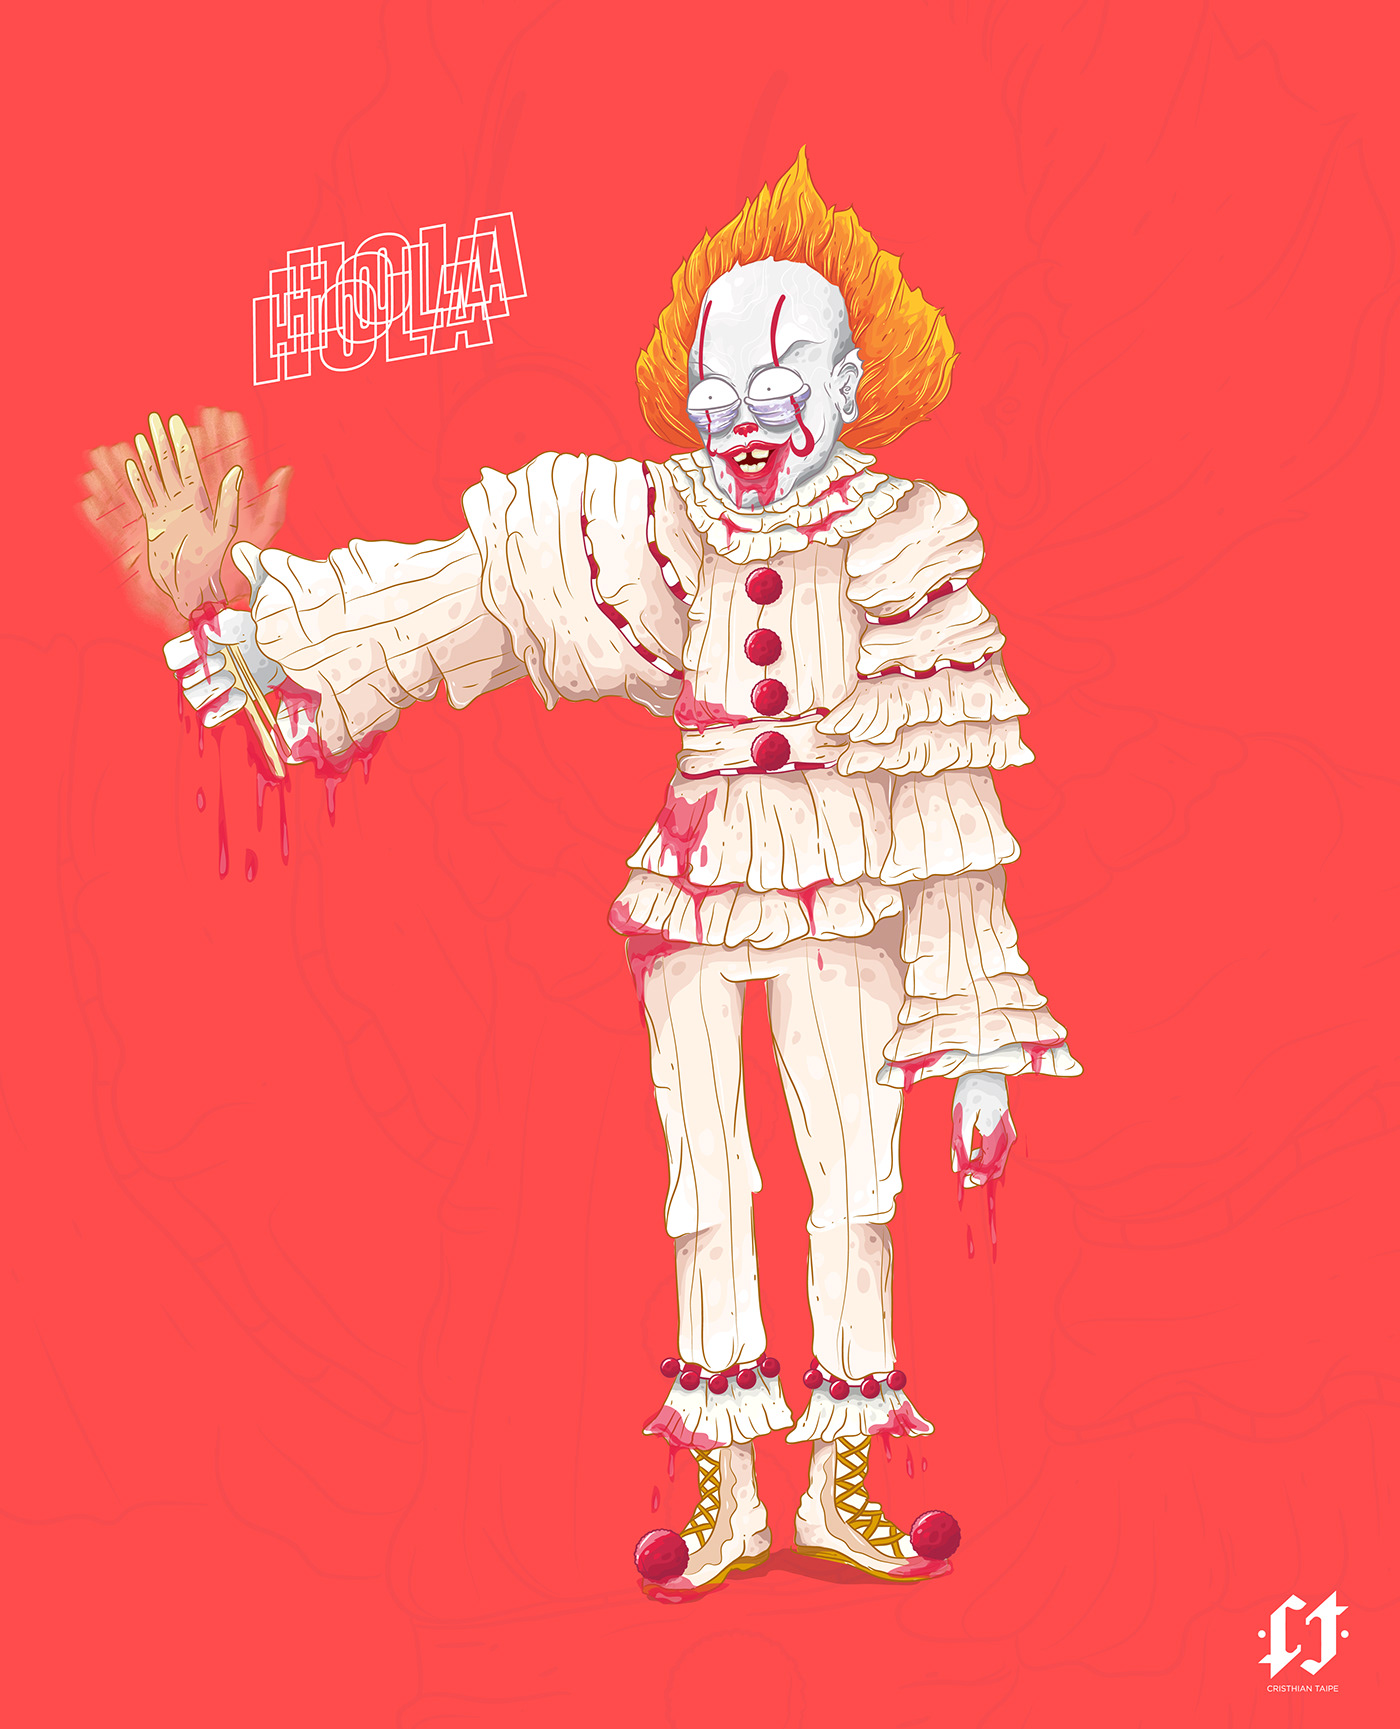 pennywise IT payaso eso pennywise illustration it illustration pennywise ilustración Illustrator Vectores